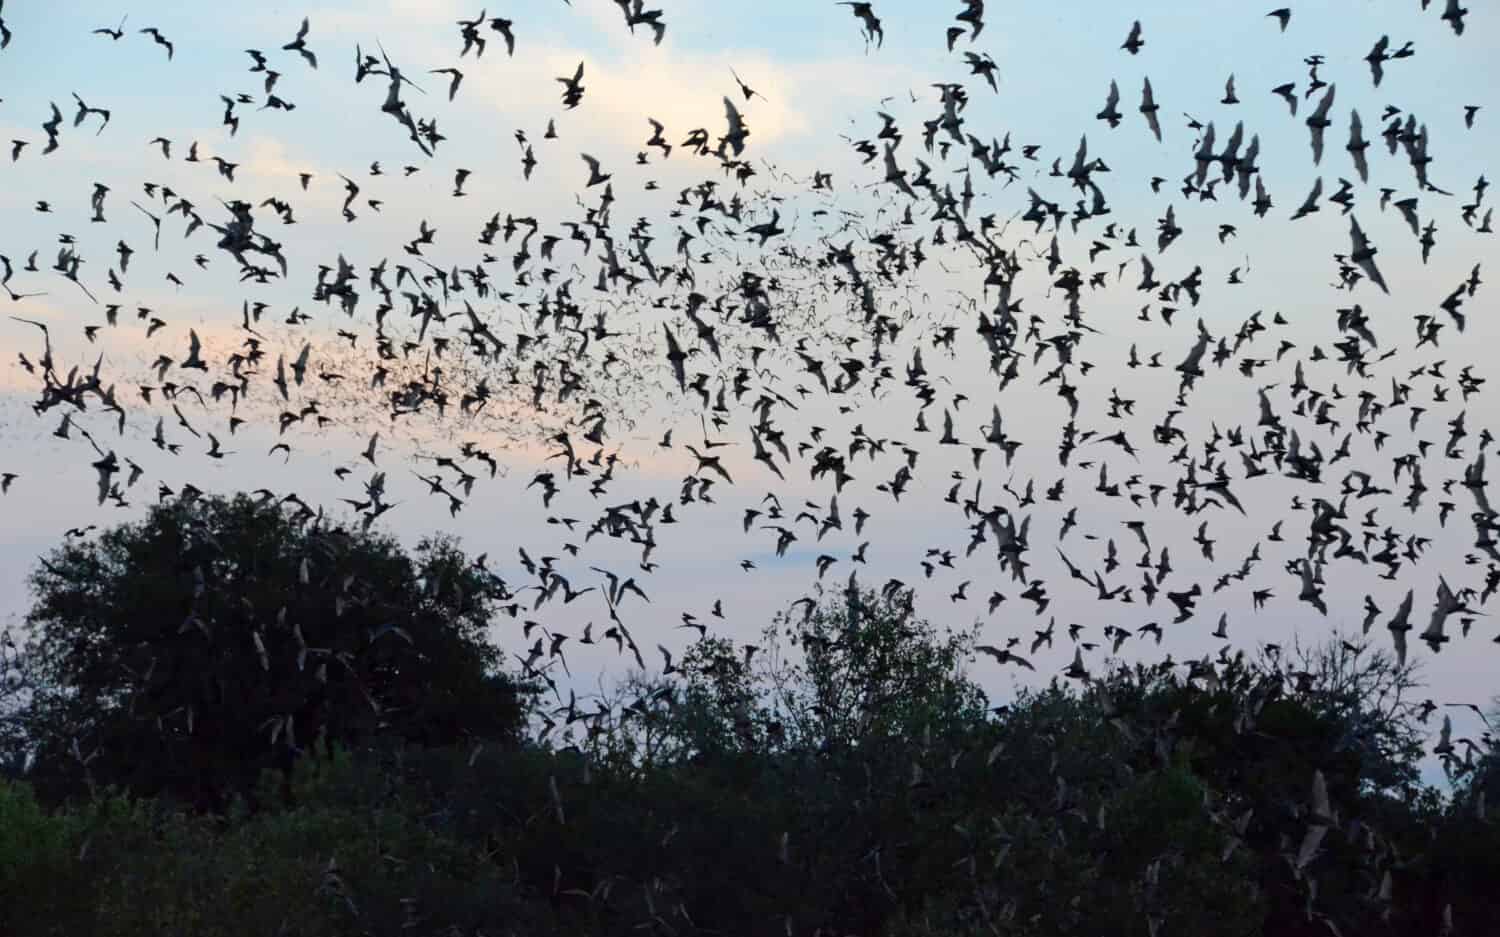 Mexican Free-tailed bats emerging from a cave in central Texas.